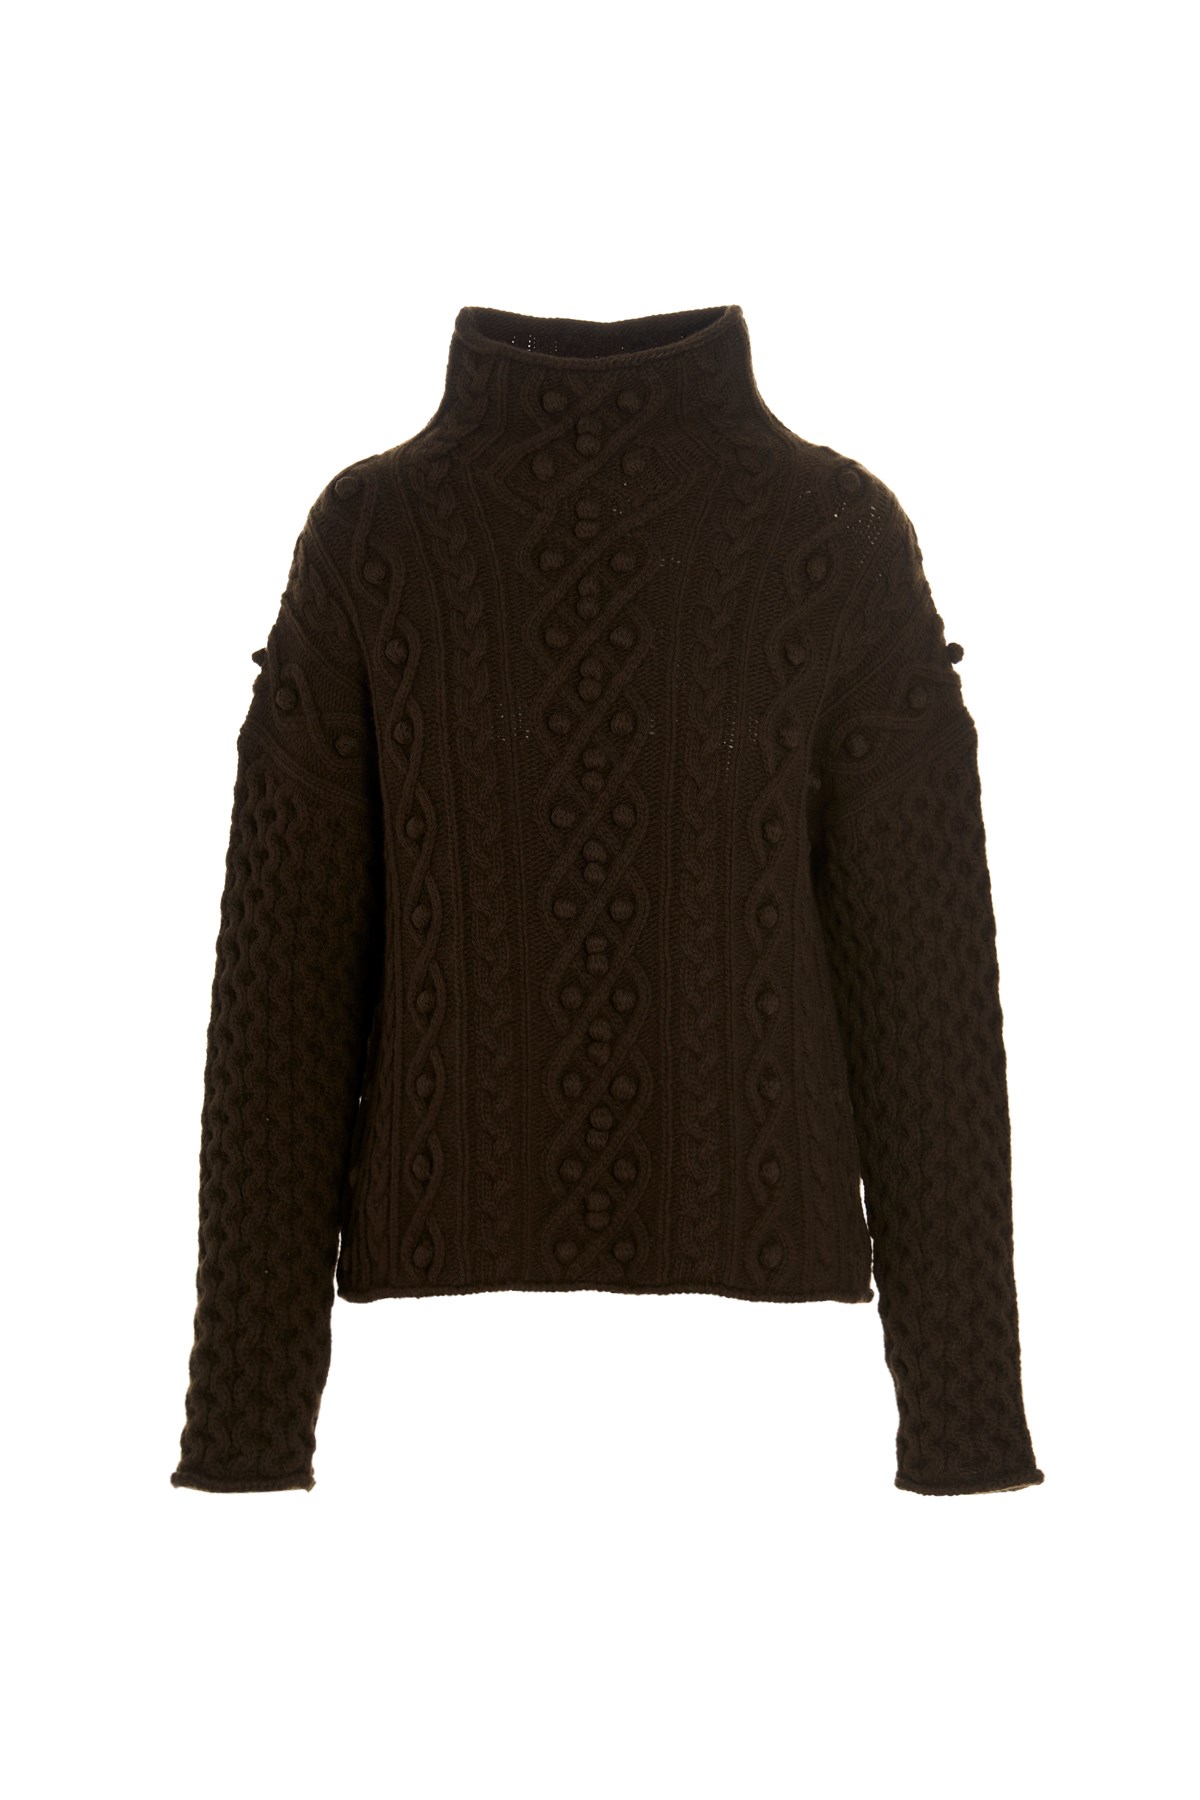 THEORY Wollpullover Mit Zopfmuster